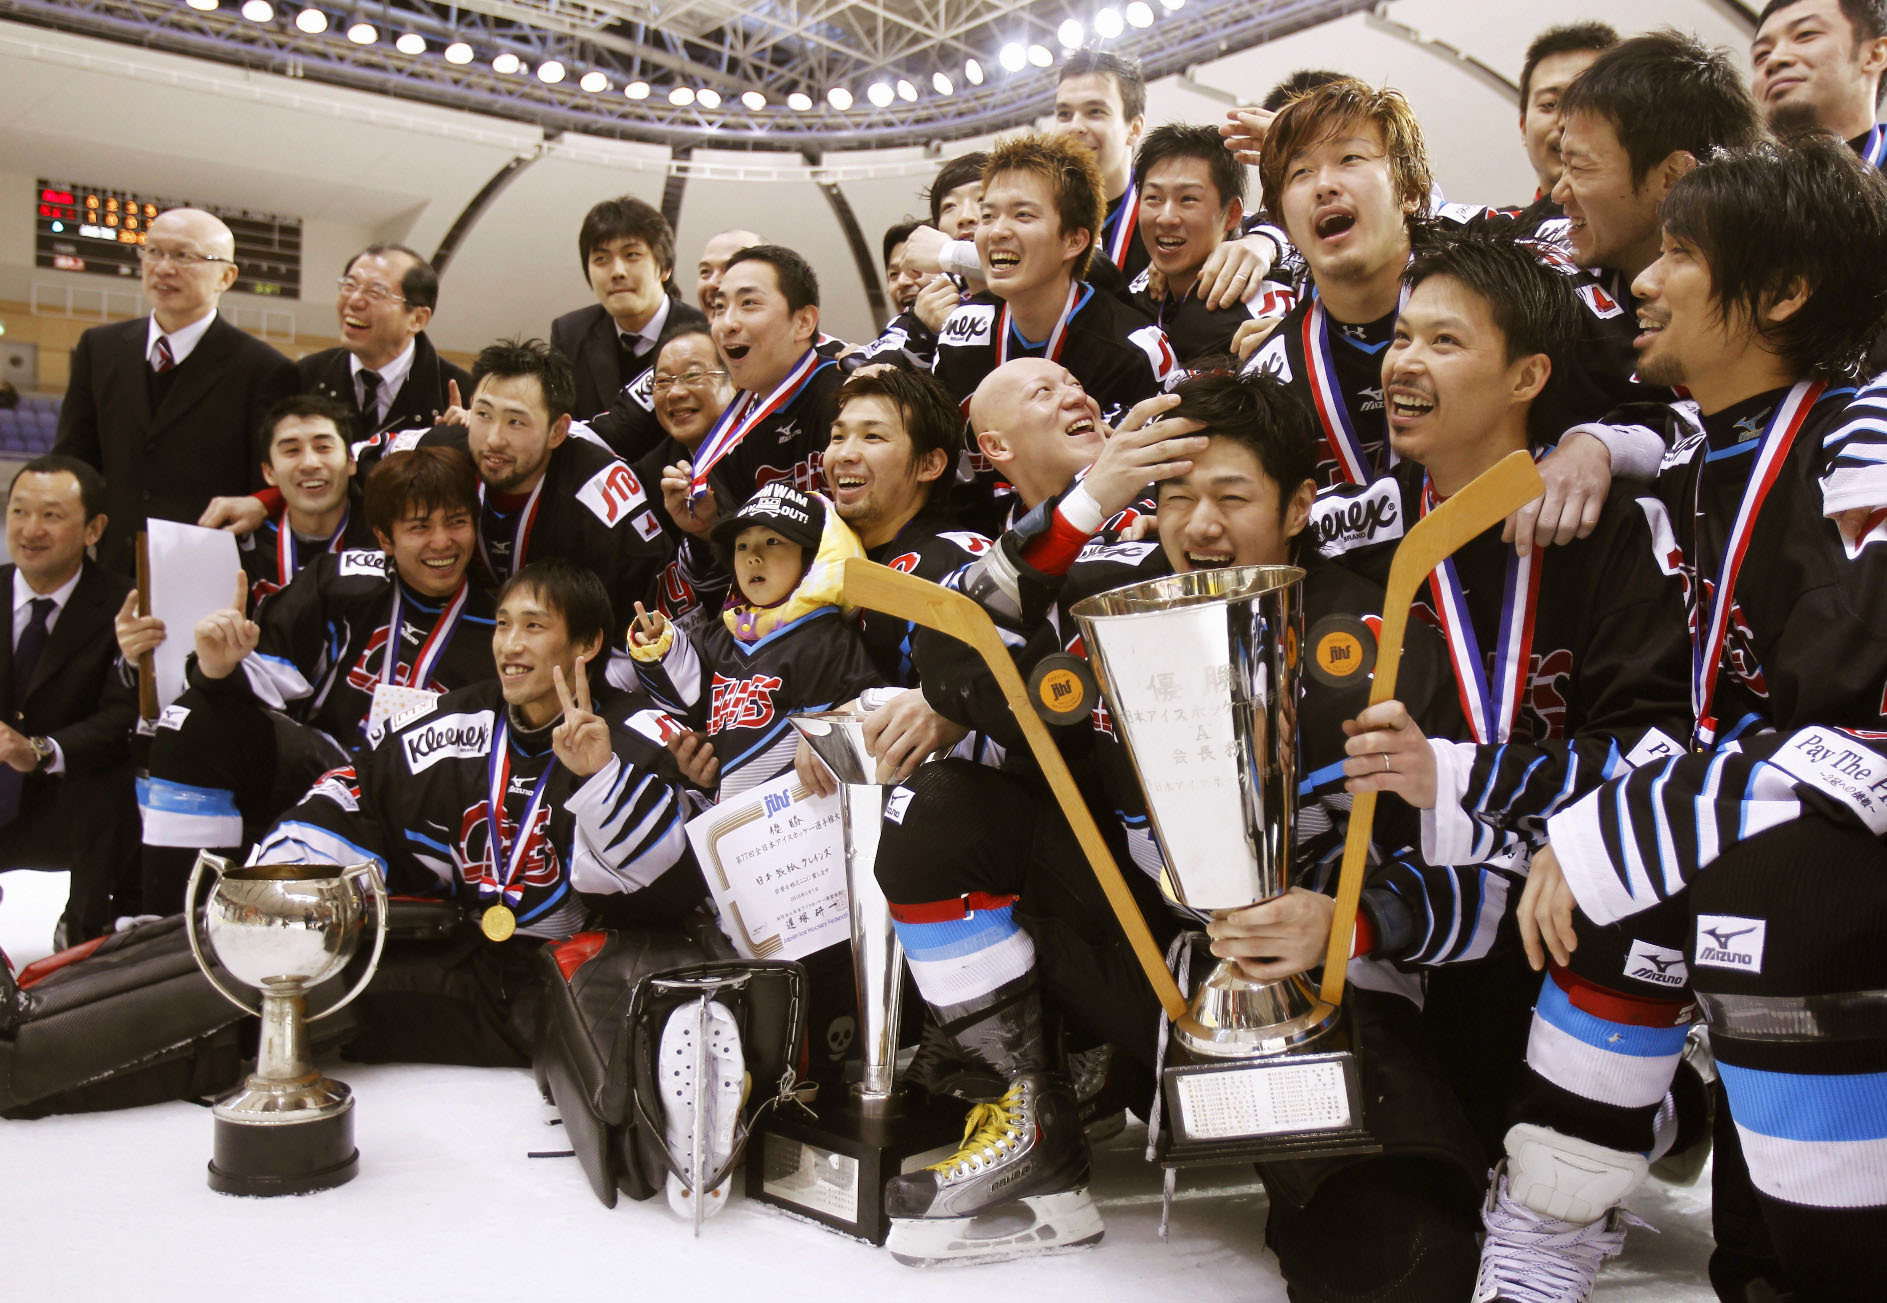 The Cranes, seen celebrating after winning the 2010 All Japan Ice Hockey Championship in Tomakomai, Hokkaido, will disband at the end of the current season. | KYODO